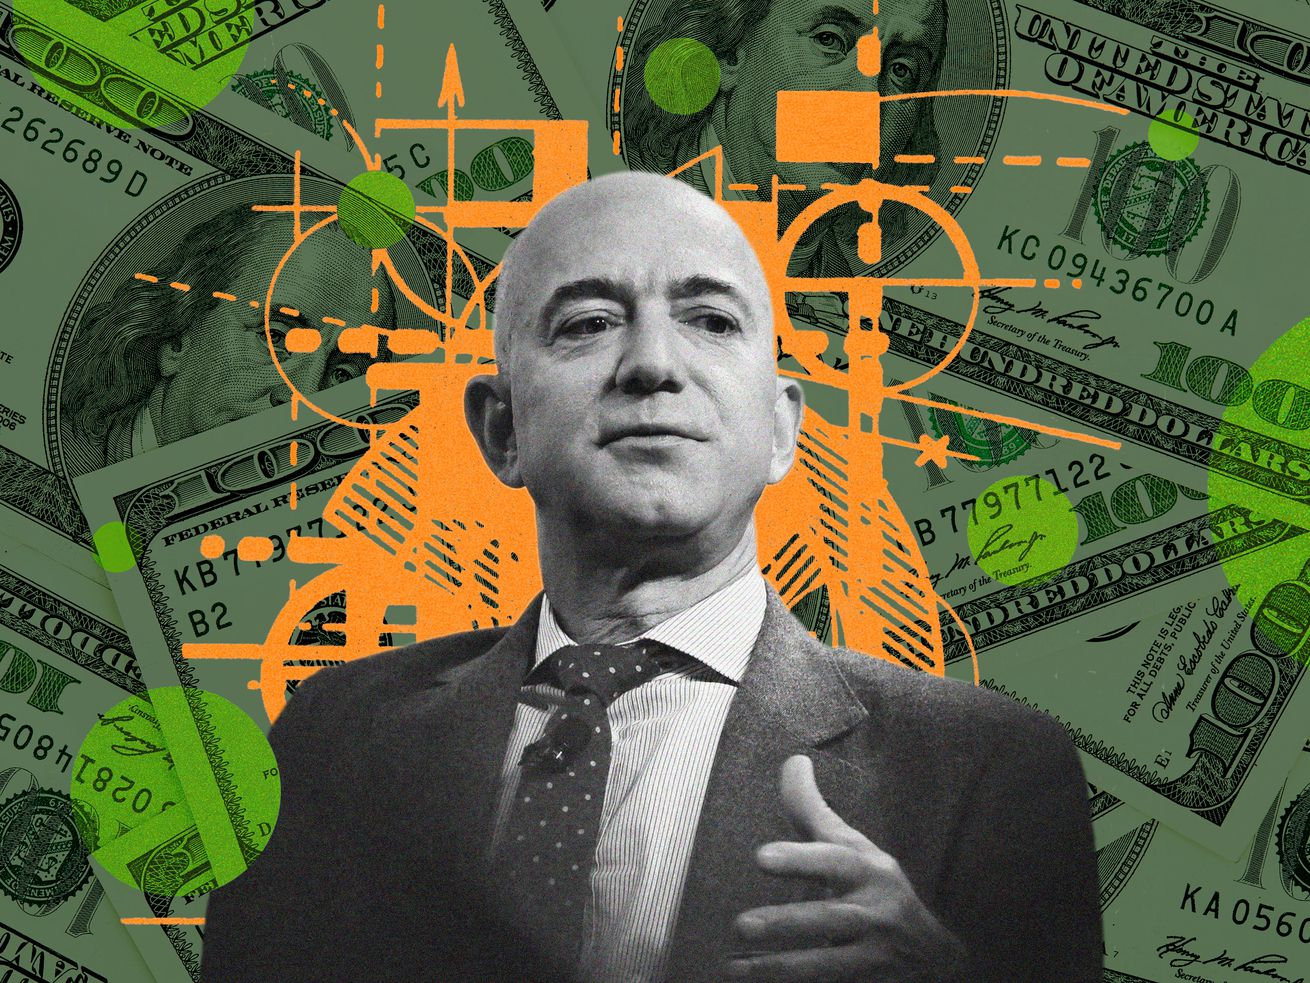 Jeff Bezos wants the world to know he’s a philanthropist